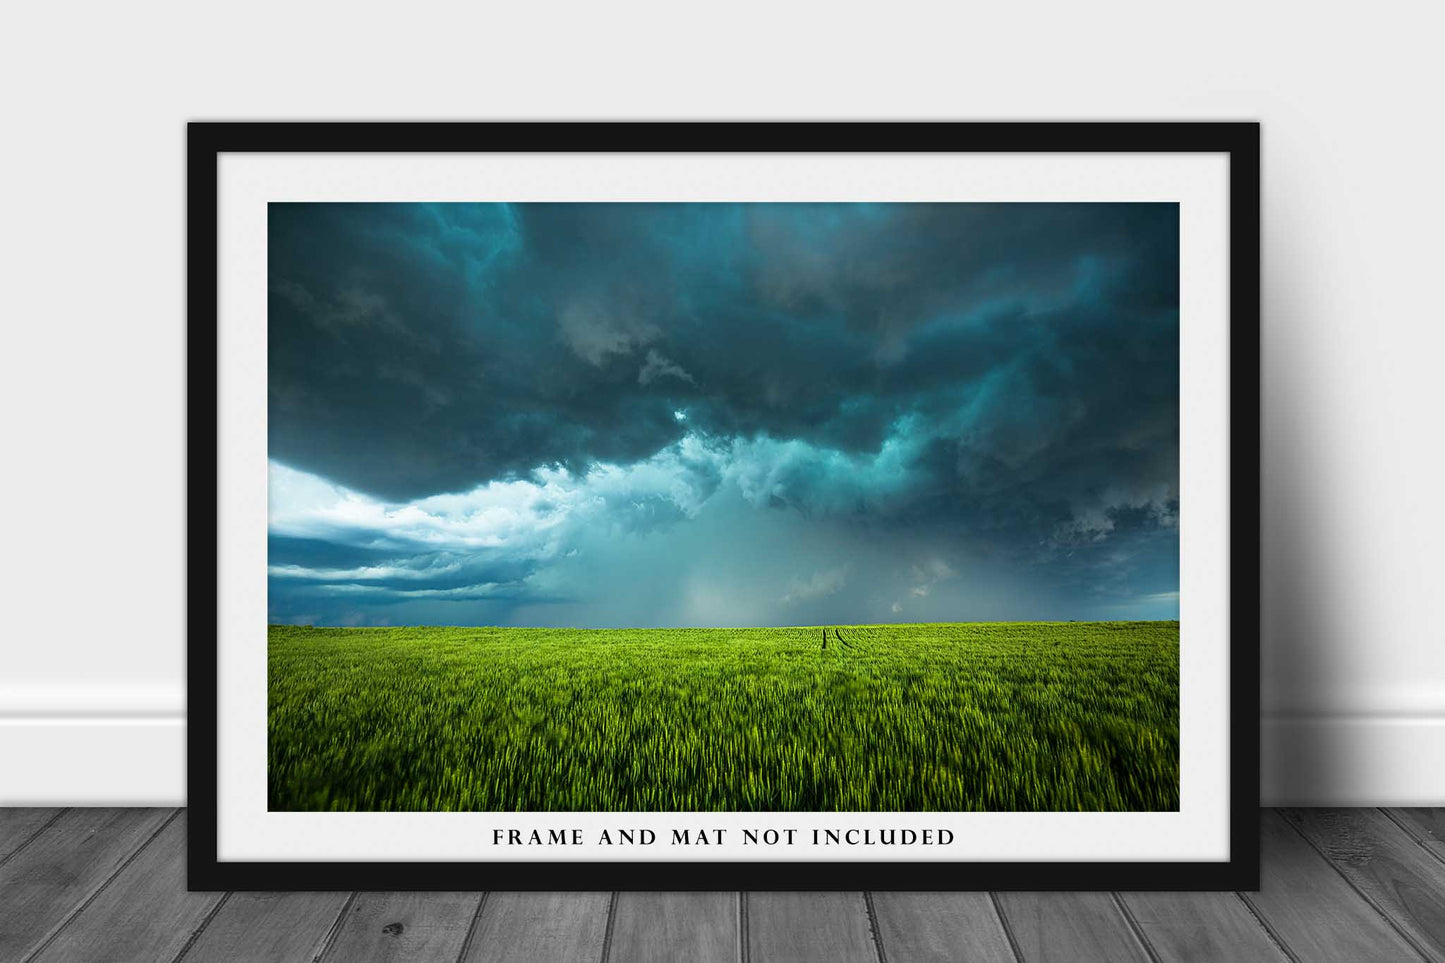 Storm Photography Print - Picture of Teal Thunderstorm Over Lush Green Wheat Field in Eastern Kansas Modern Farmhouse Decor 4x6 to 40x60